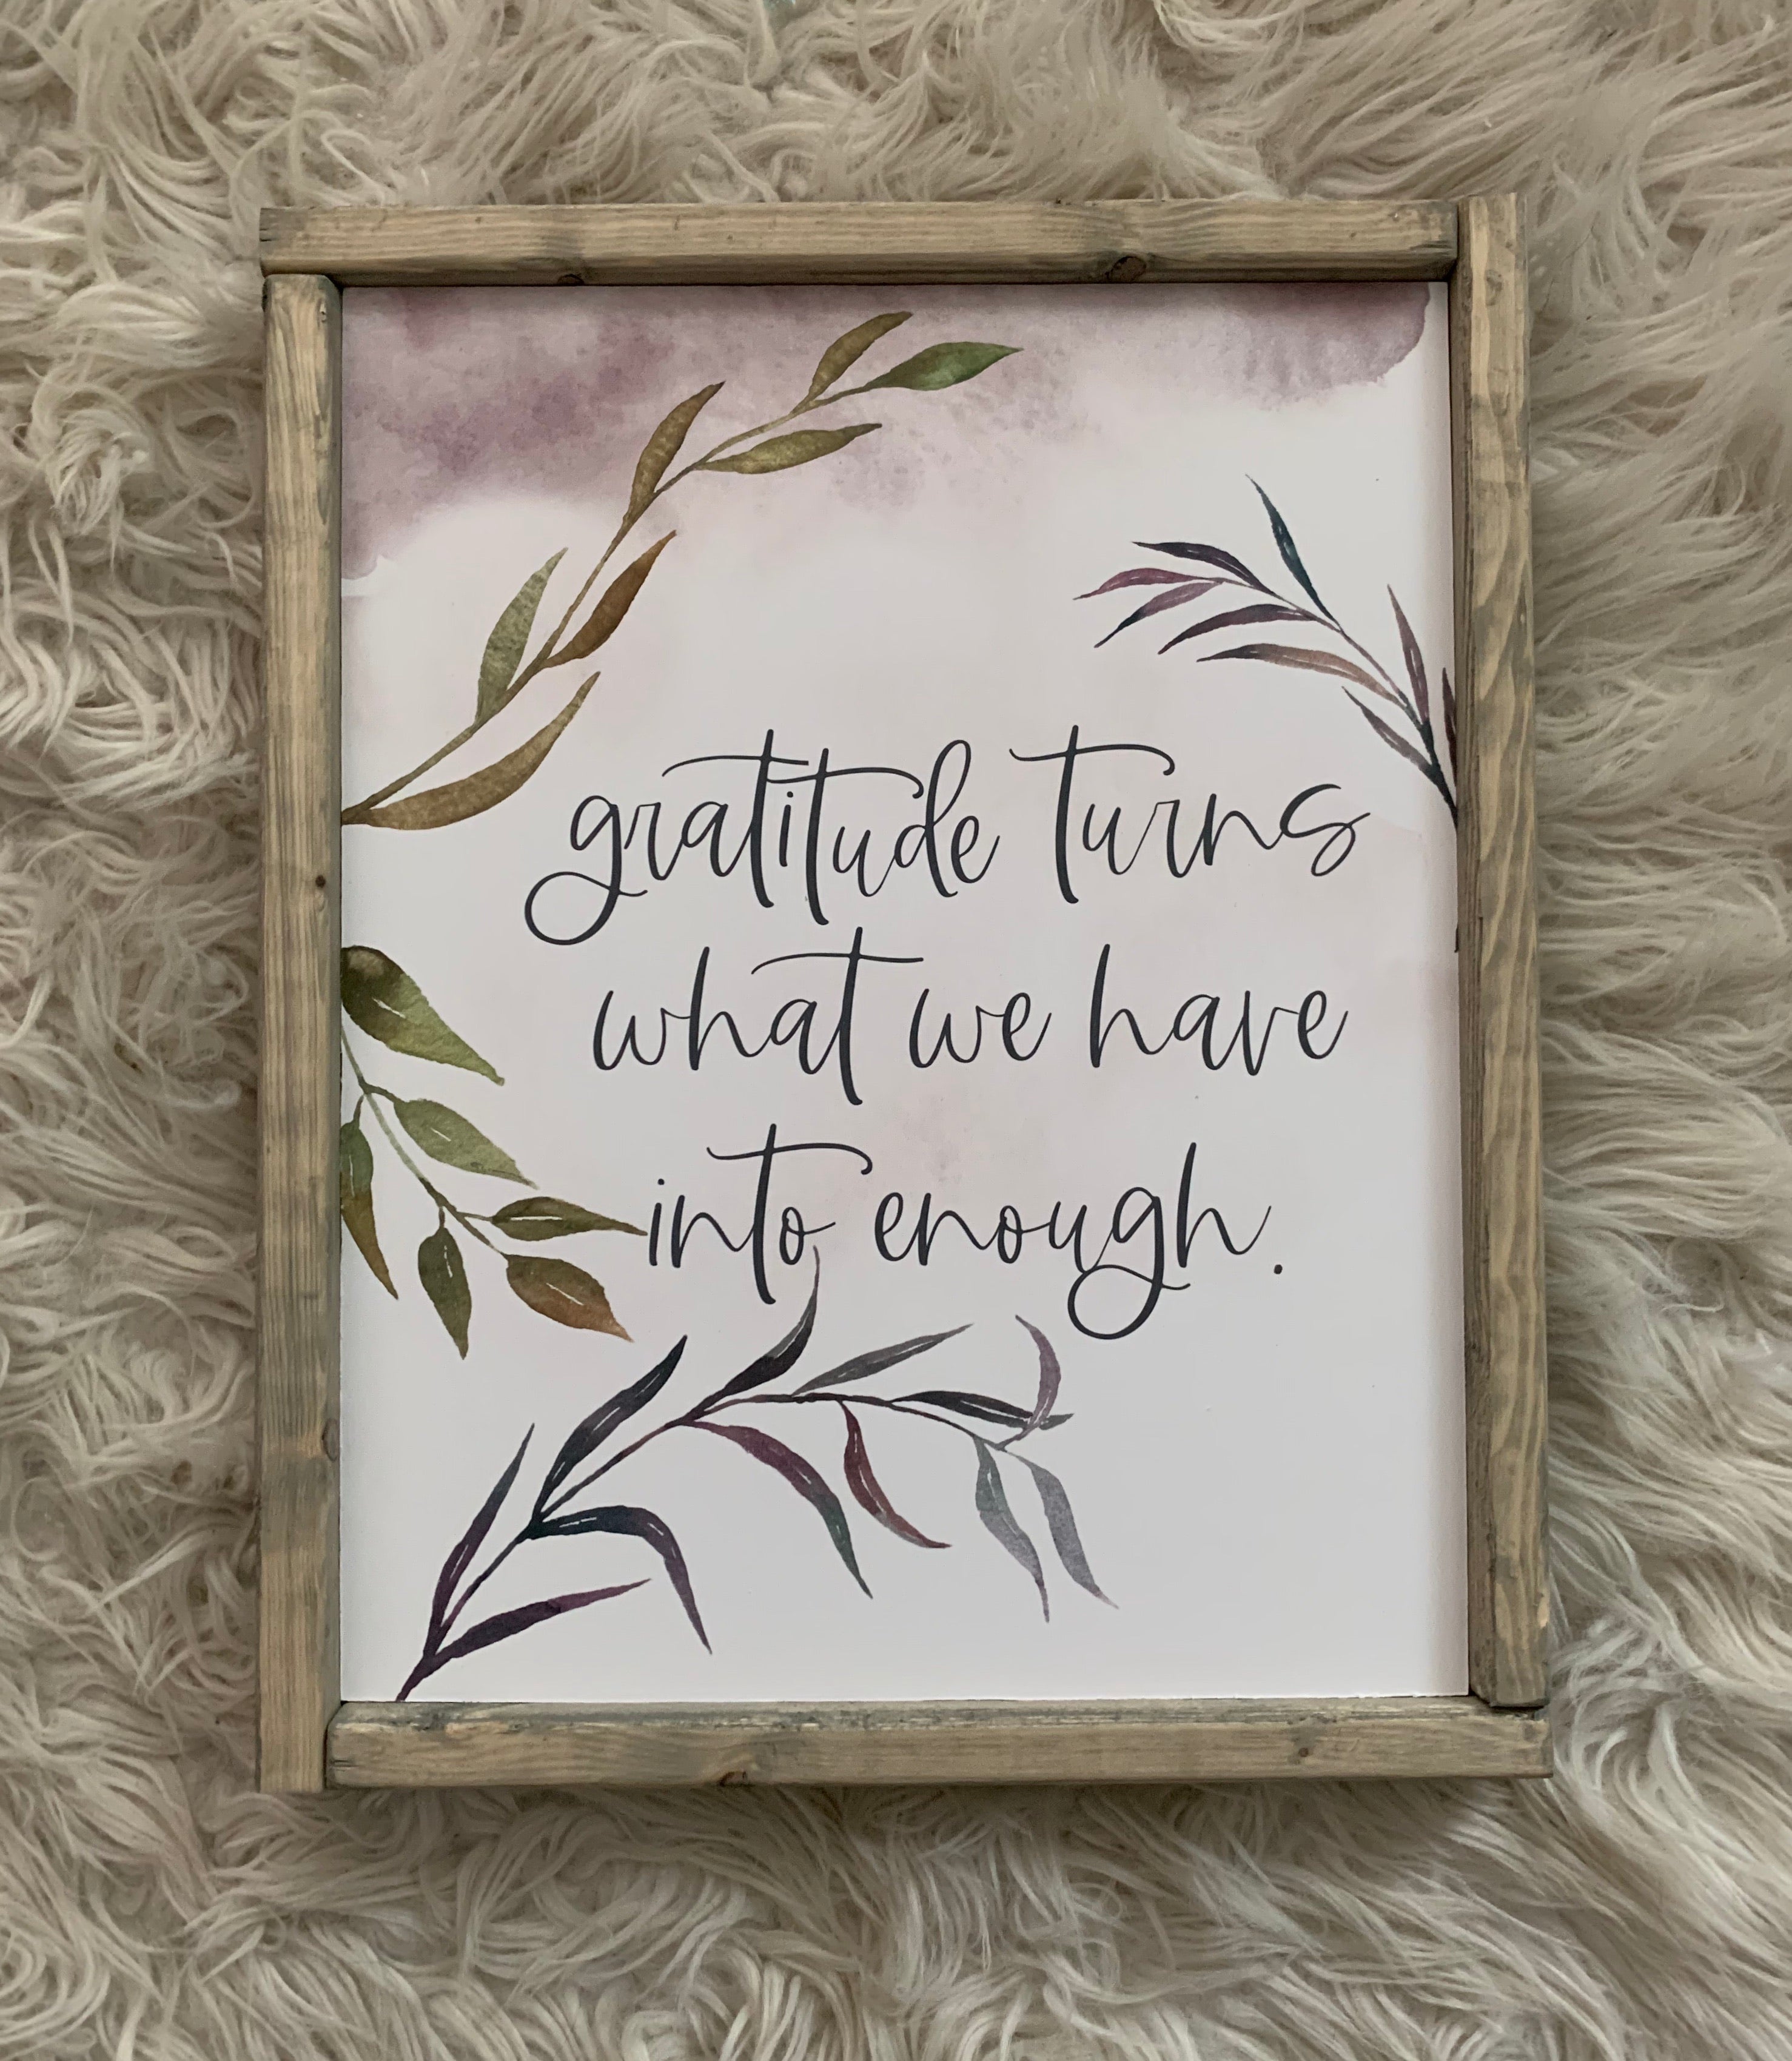 Gratitude Turns What We Have Into Enough